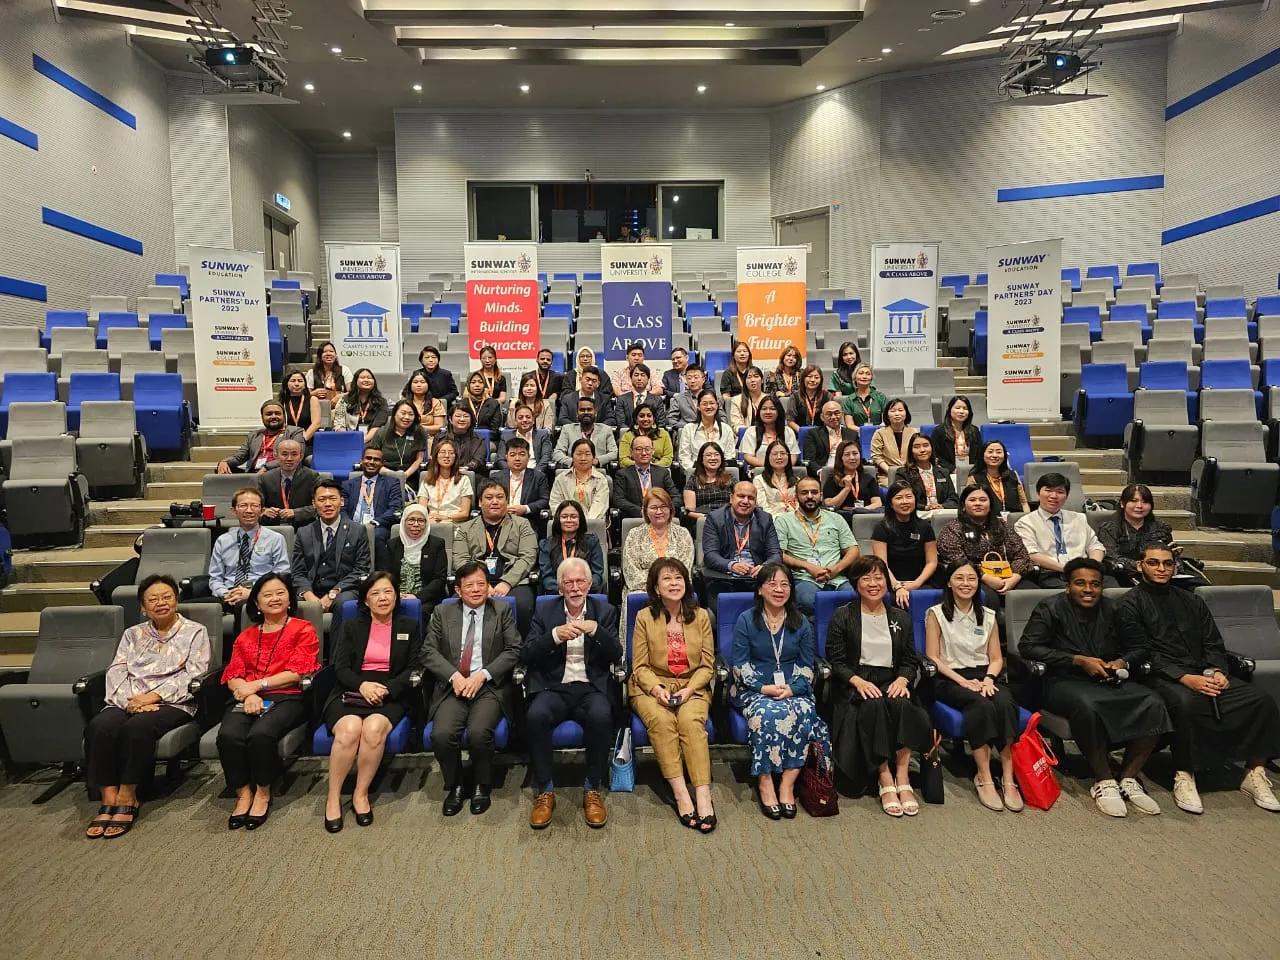 The International Office organized a 3-day Sunway Partners' Day